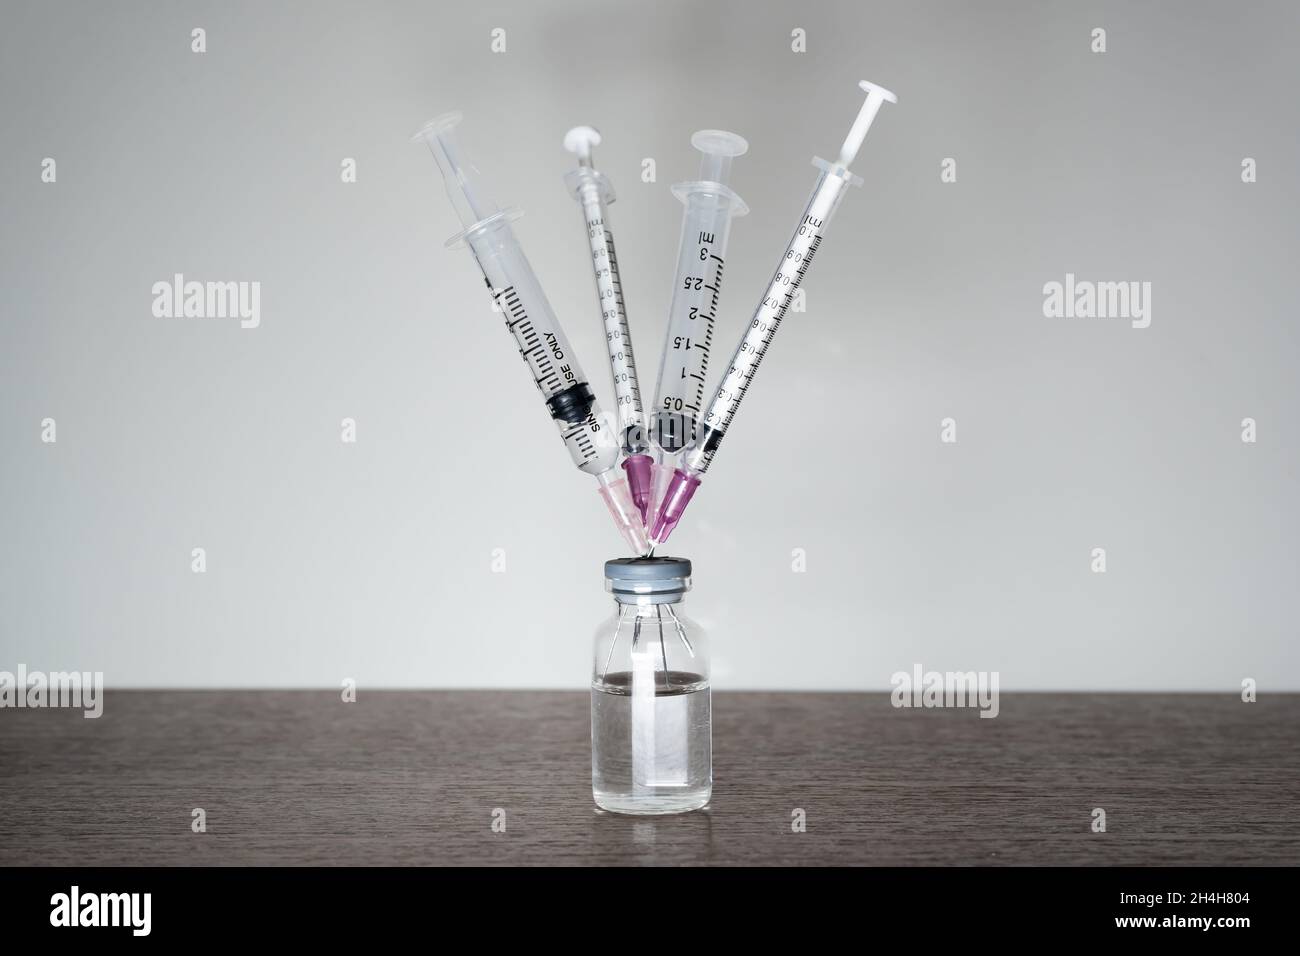 A vaccine vial with 4 syringes. A fourth dose Covid-19 vaccine booster shot concept. Stock Photo